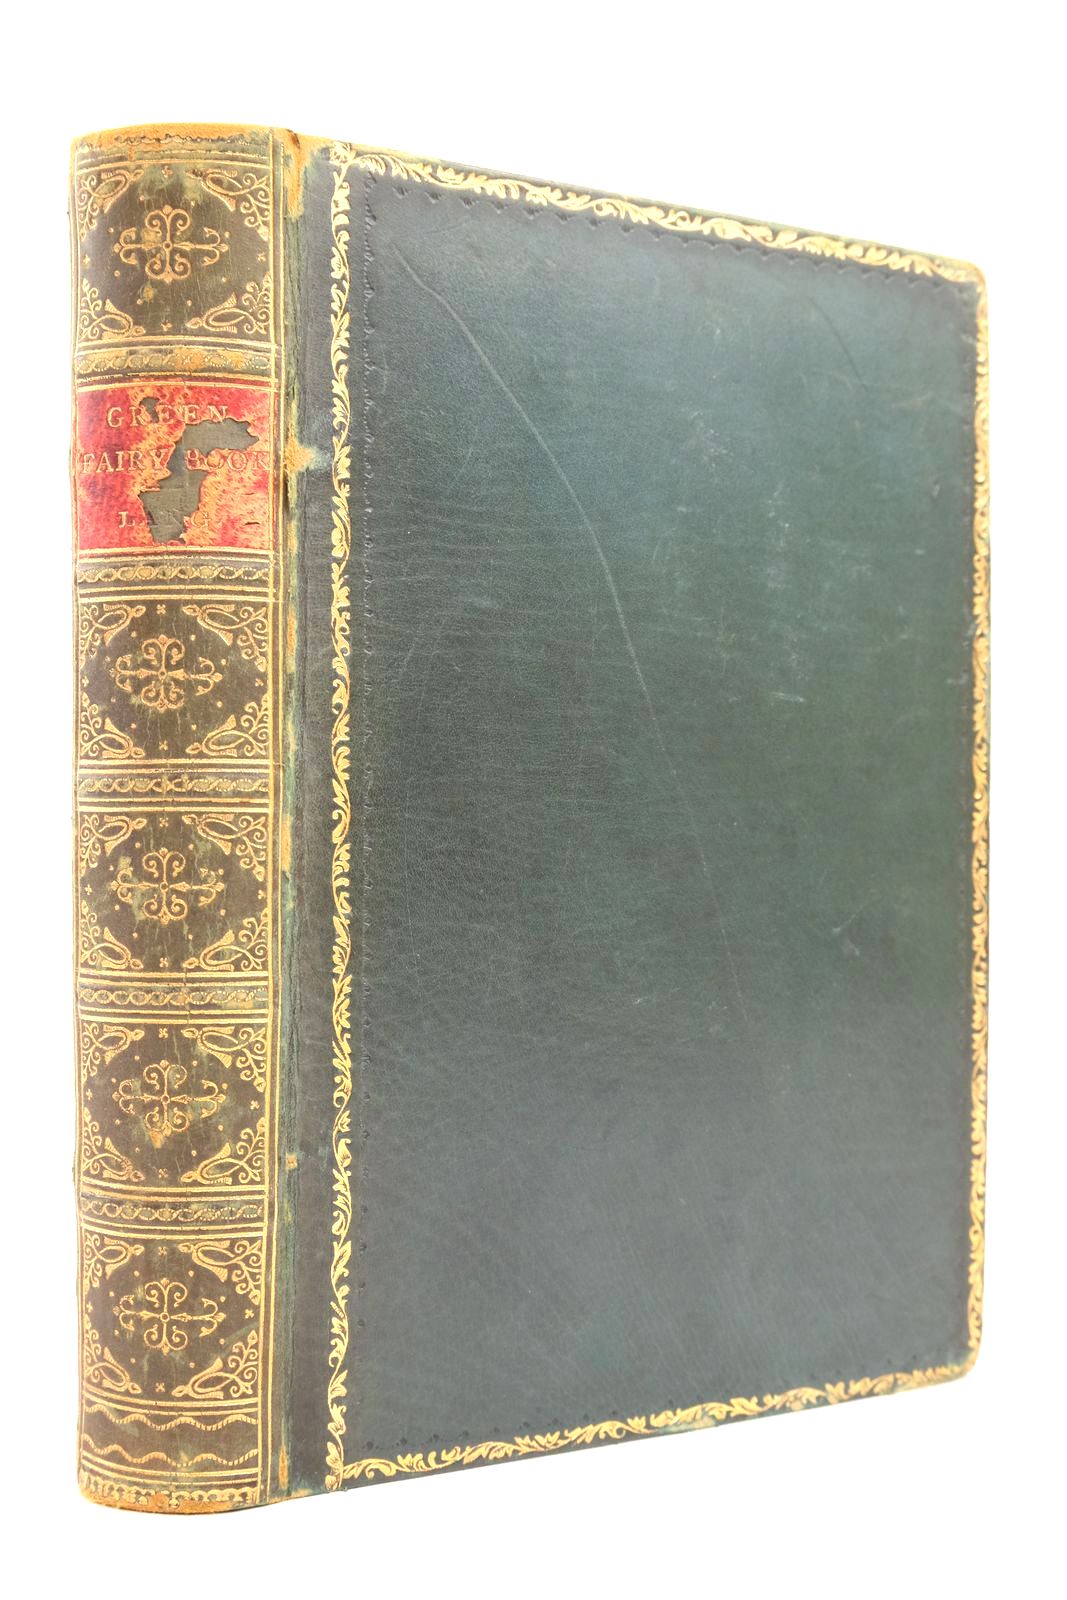 Photo of THE GREEN FAIRY BOOK written by Lang, Andrew illustrated by Ford, H.J. published by Longmans, Green &amp; Co. (STOCK CODE: 2139414)  for sale by Stella & Rose's Books